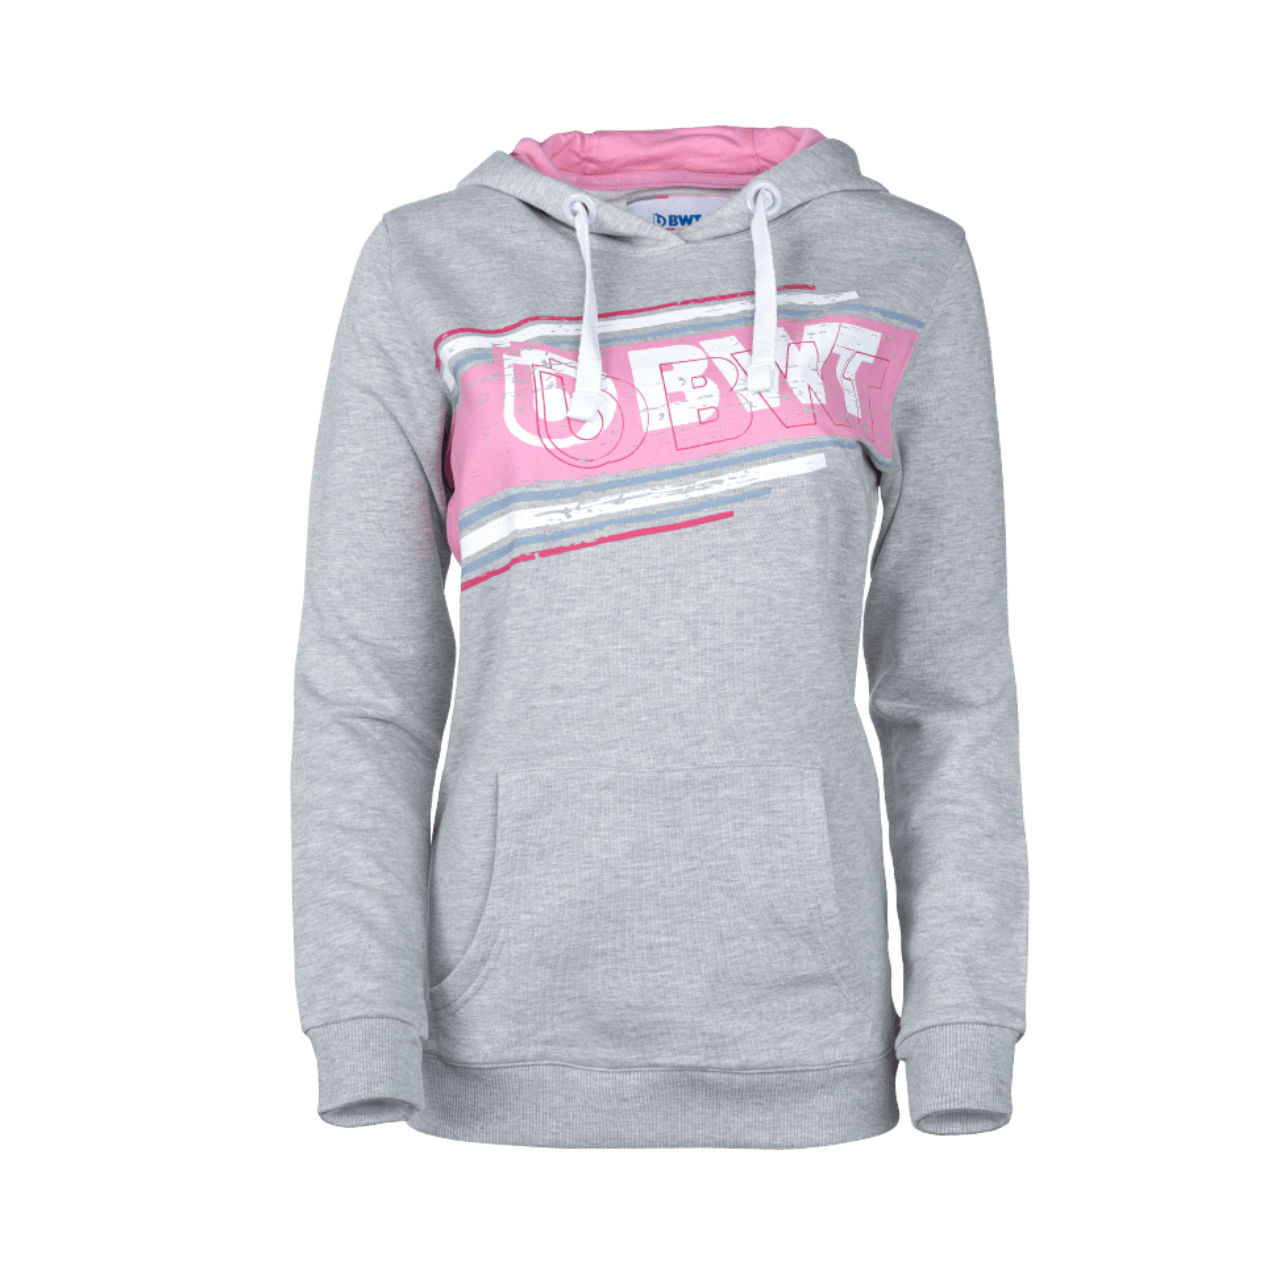 BWT Lifestyle Hoodie Ladies in grey with white BWT logo on pink background